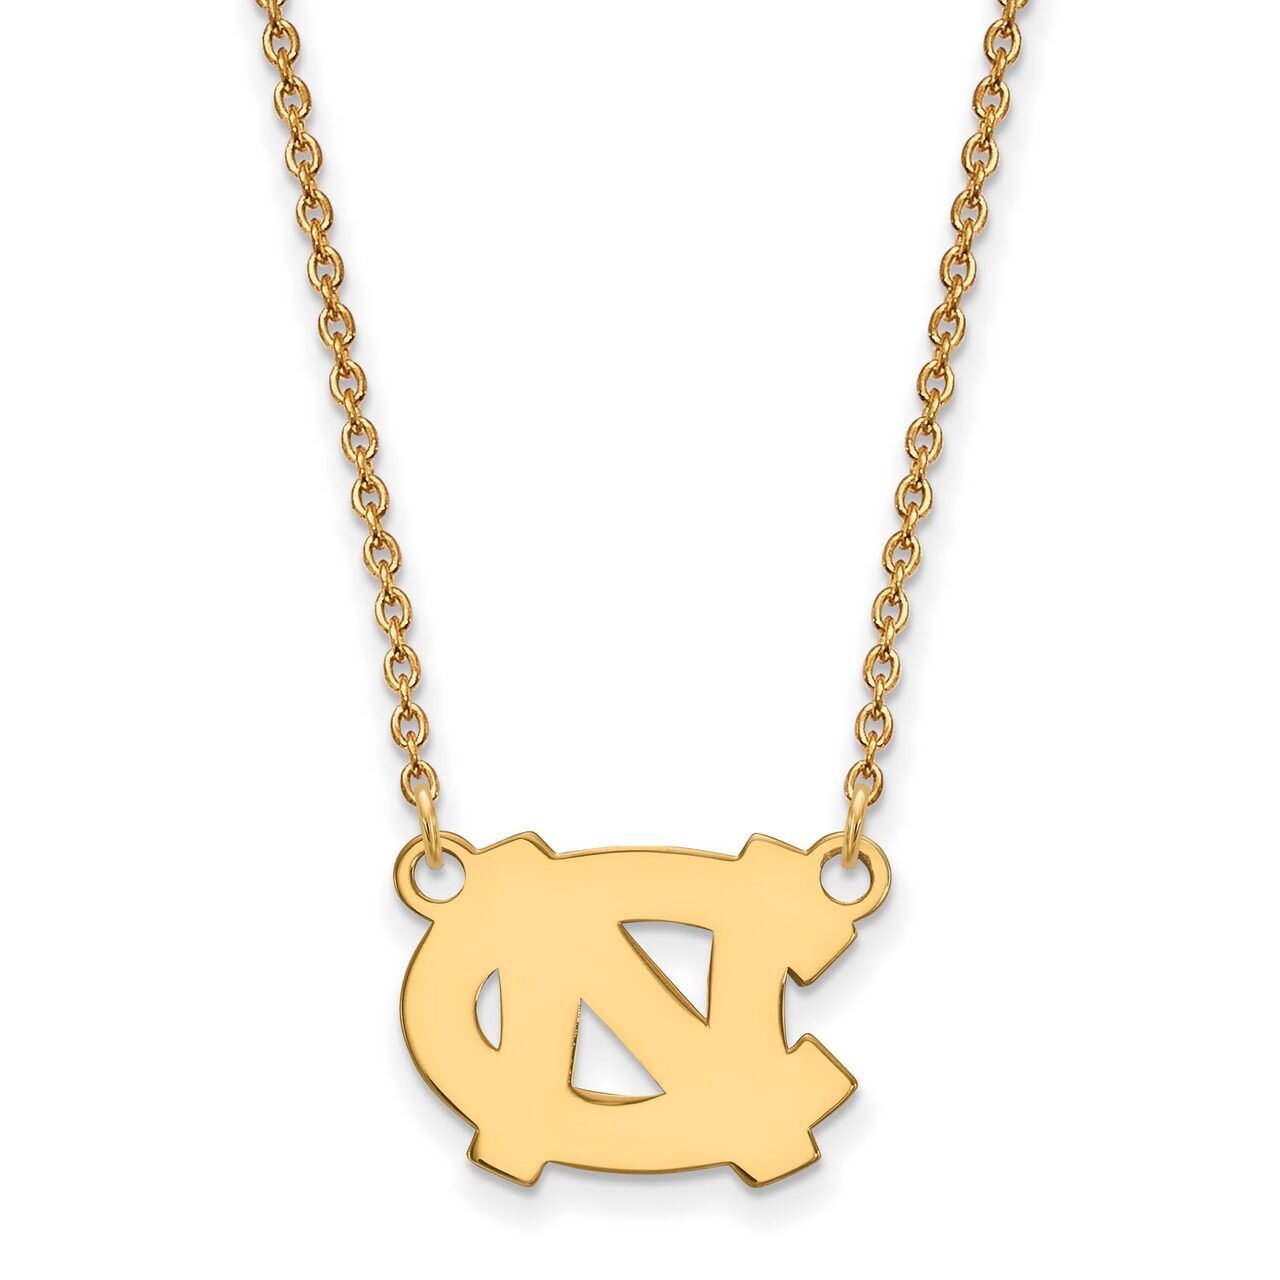 University of North Carolina Small Pendant with Chain Necklace 10k Yellow Gold 1Y014UNC-18